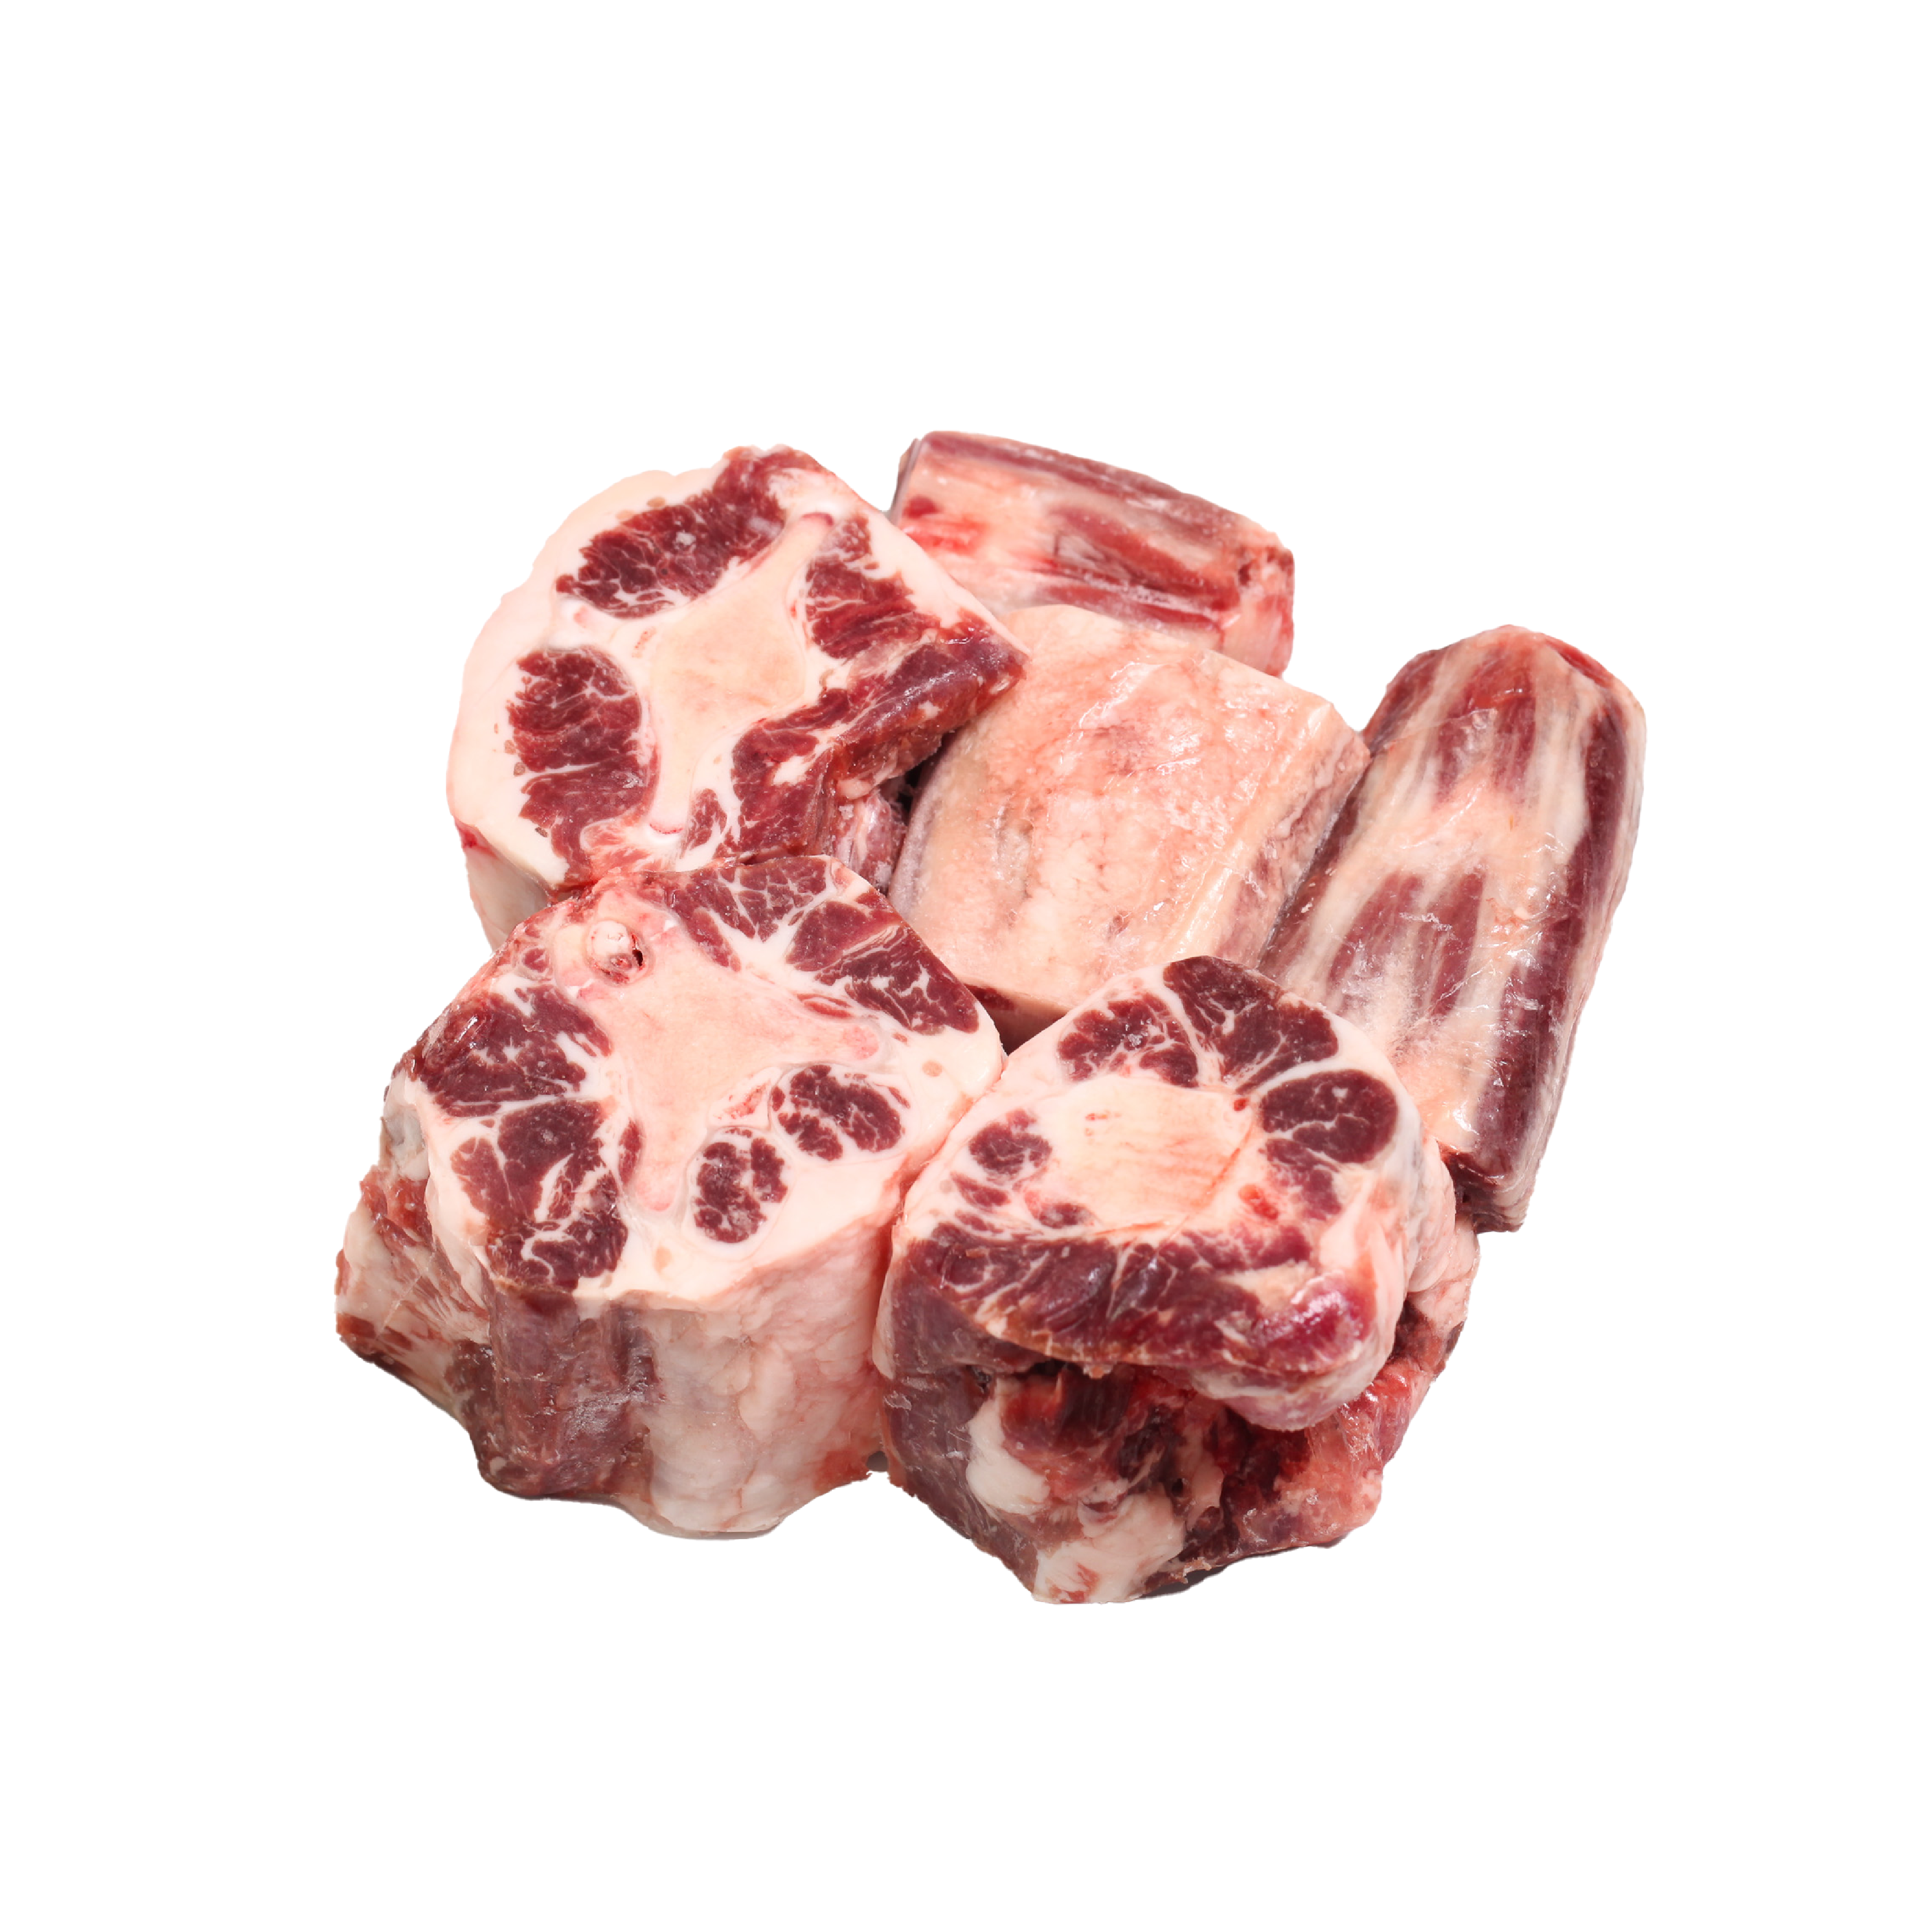 O'connor oxtail